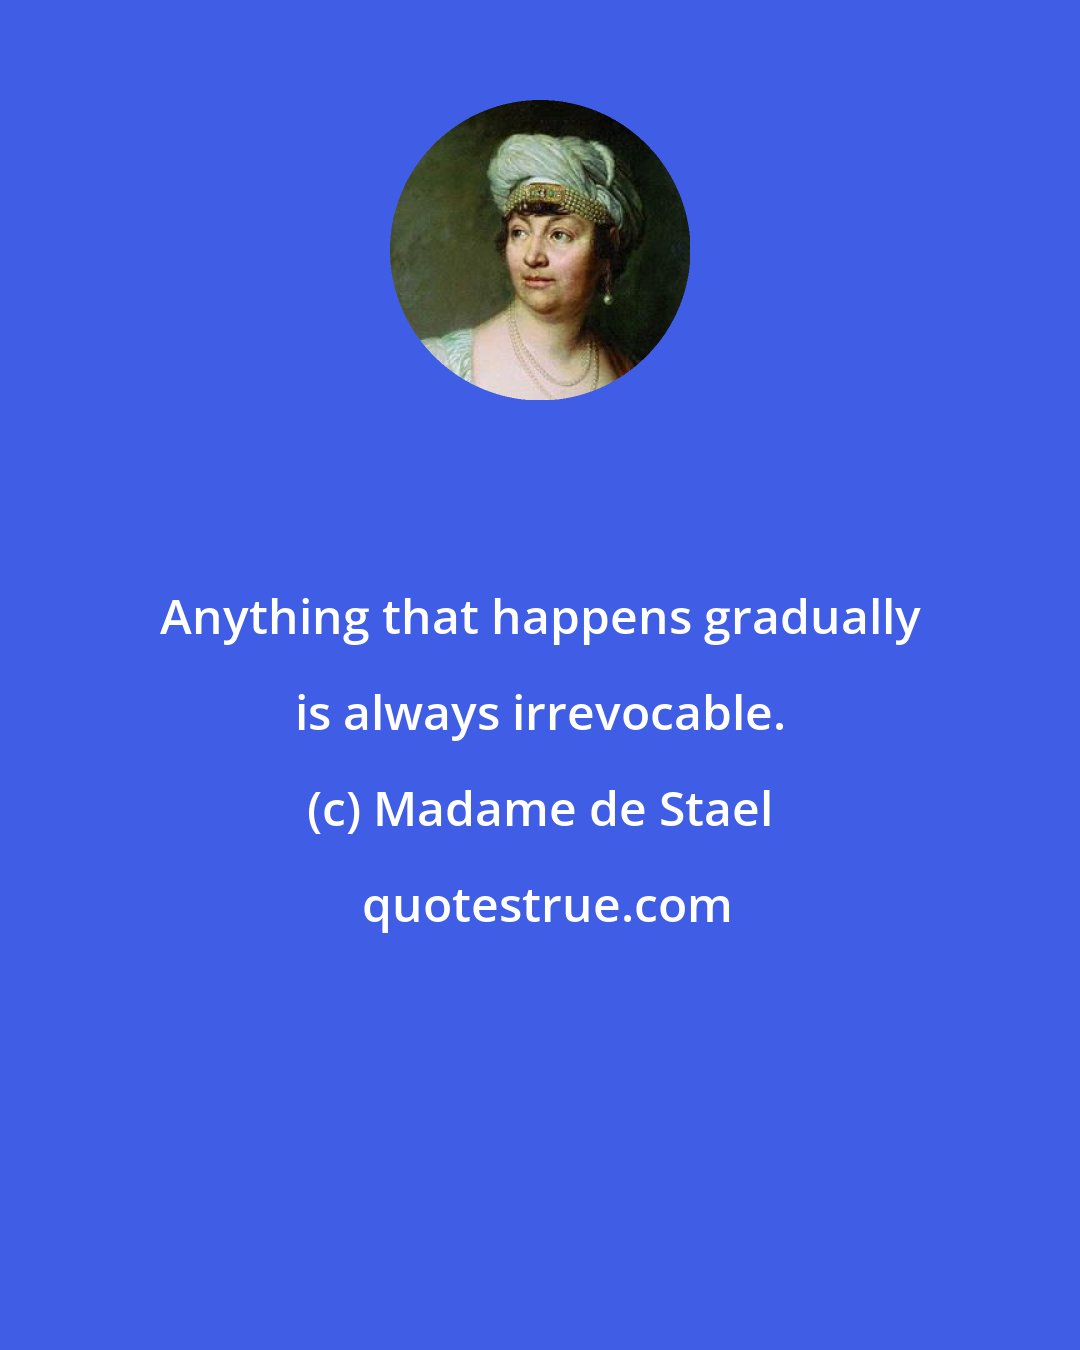 Madame de Stael: Anything that happens gradually is always irrevocable.